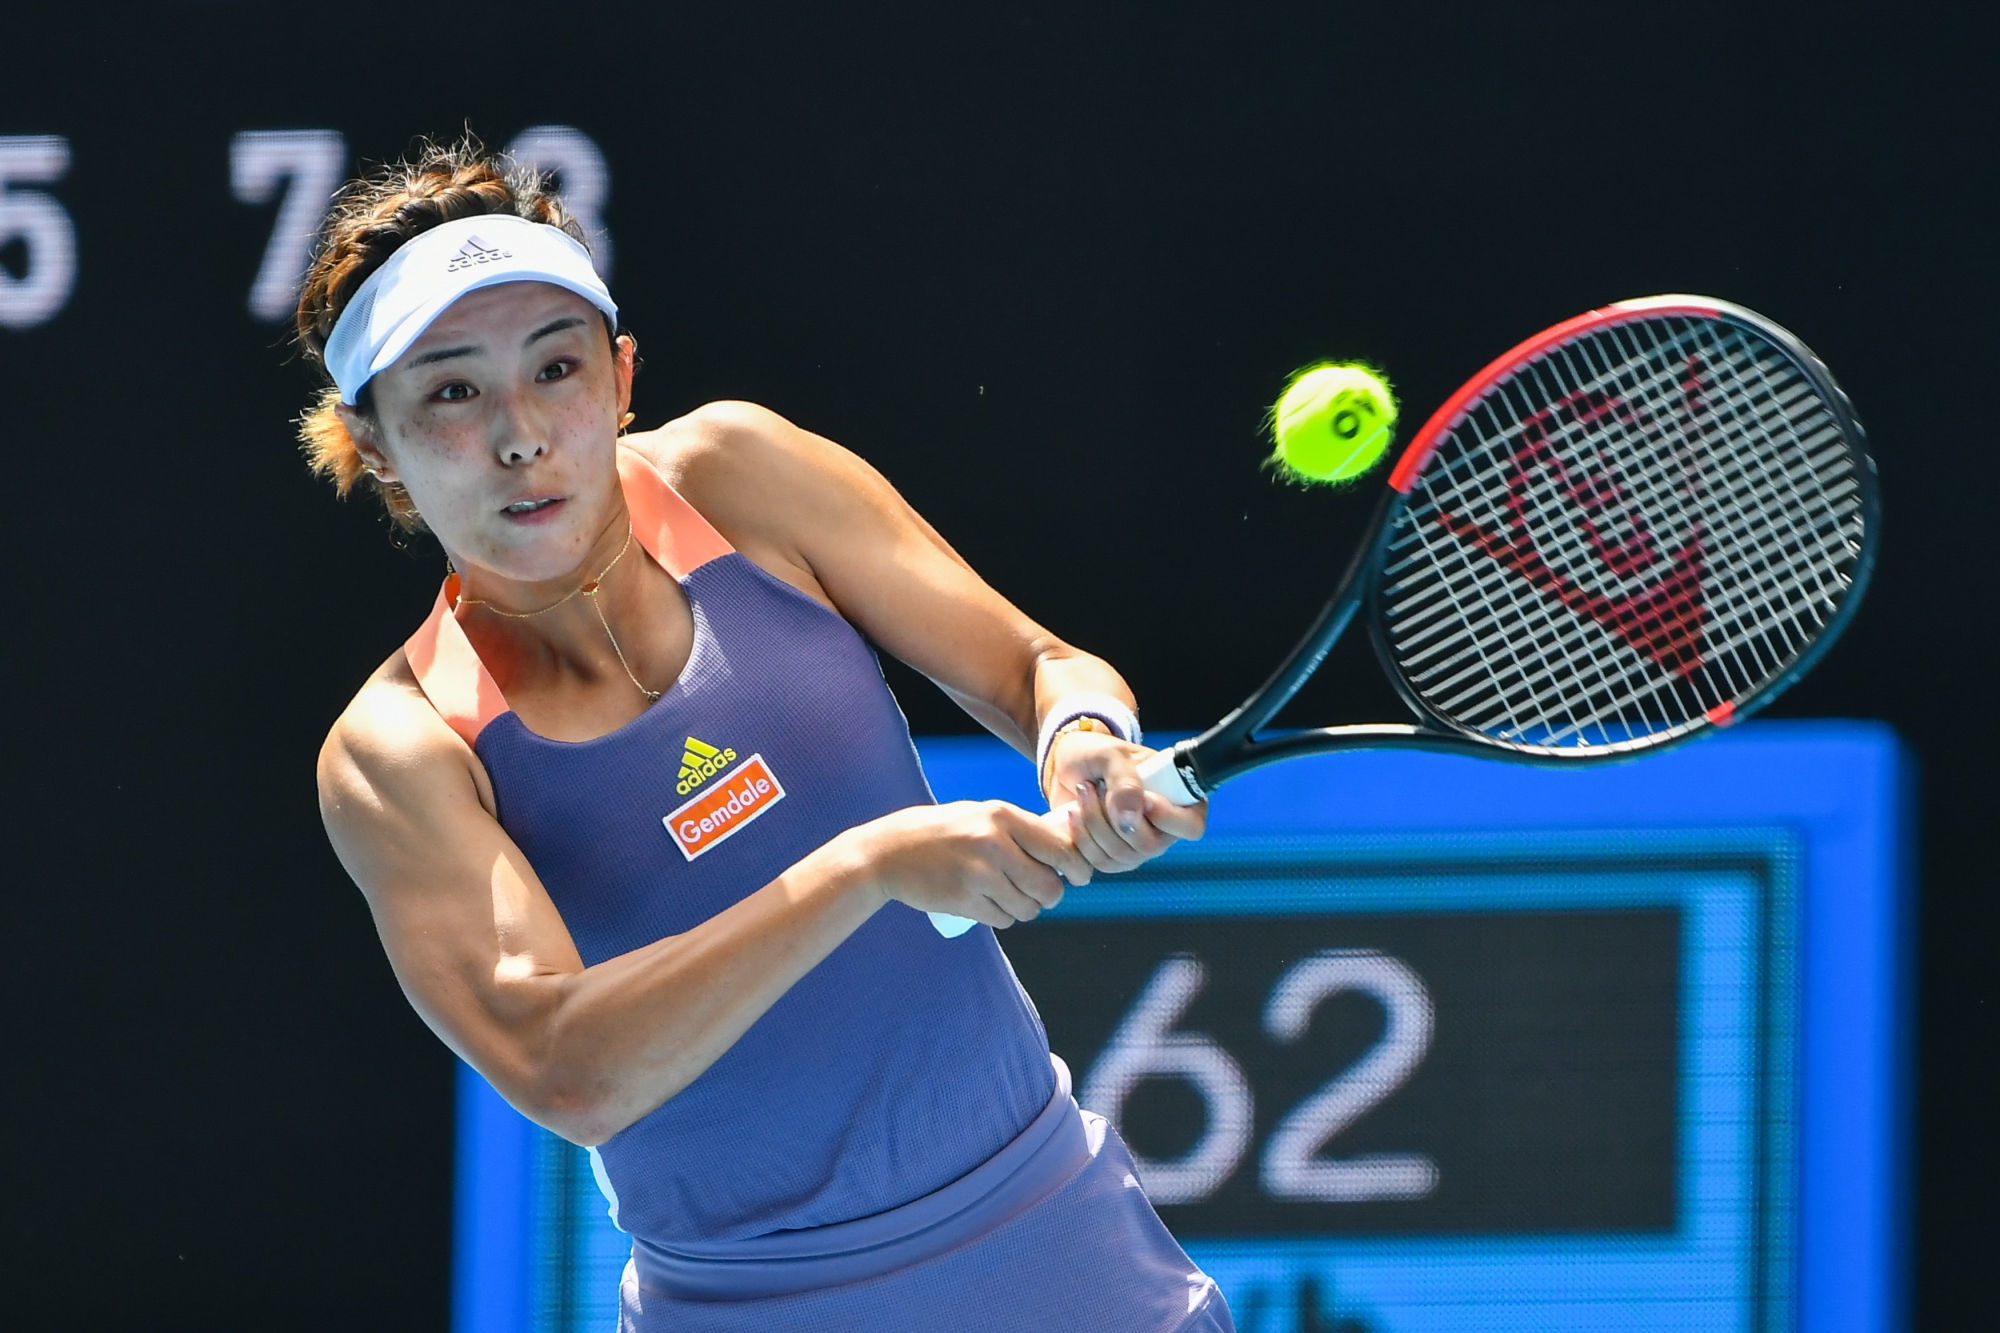 January 24, 2020: 27th seed QIANG WANG (CHN) in action against 8th seed SERENA WILLIAMS (USA) on Rod Laver Arena in a Women's Singles 3rd round match on day 5 of the Australian Open 2020 in Melbourne, Australia. Sydney Low/Cal Sport Media/Sipa USA. WANG won 64 67 75(Credit Image: © Sydney Low/CSM/Sipa USA) 

Photo by Icon Sport - Wang QIANG